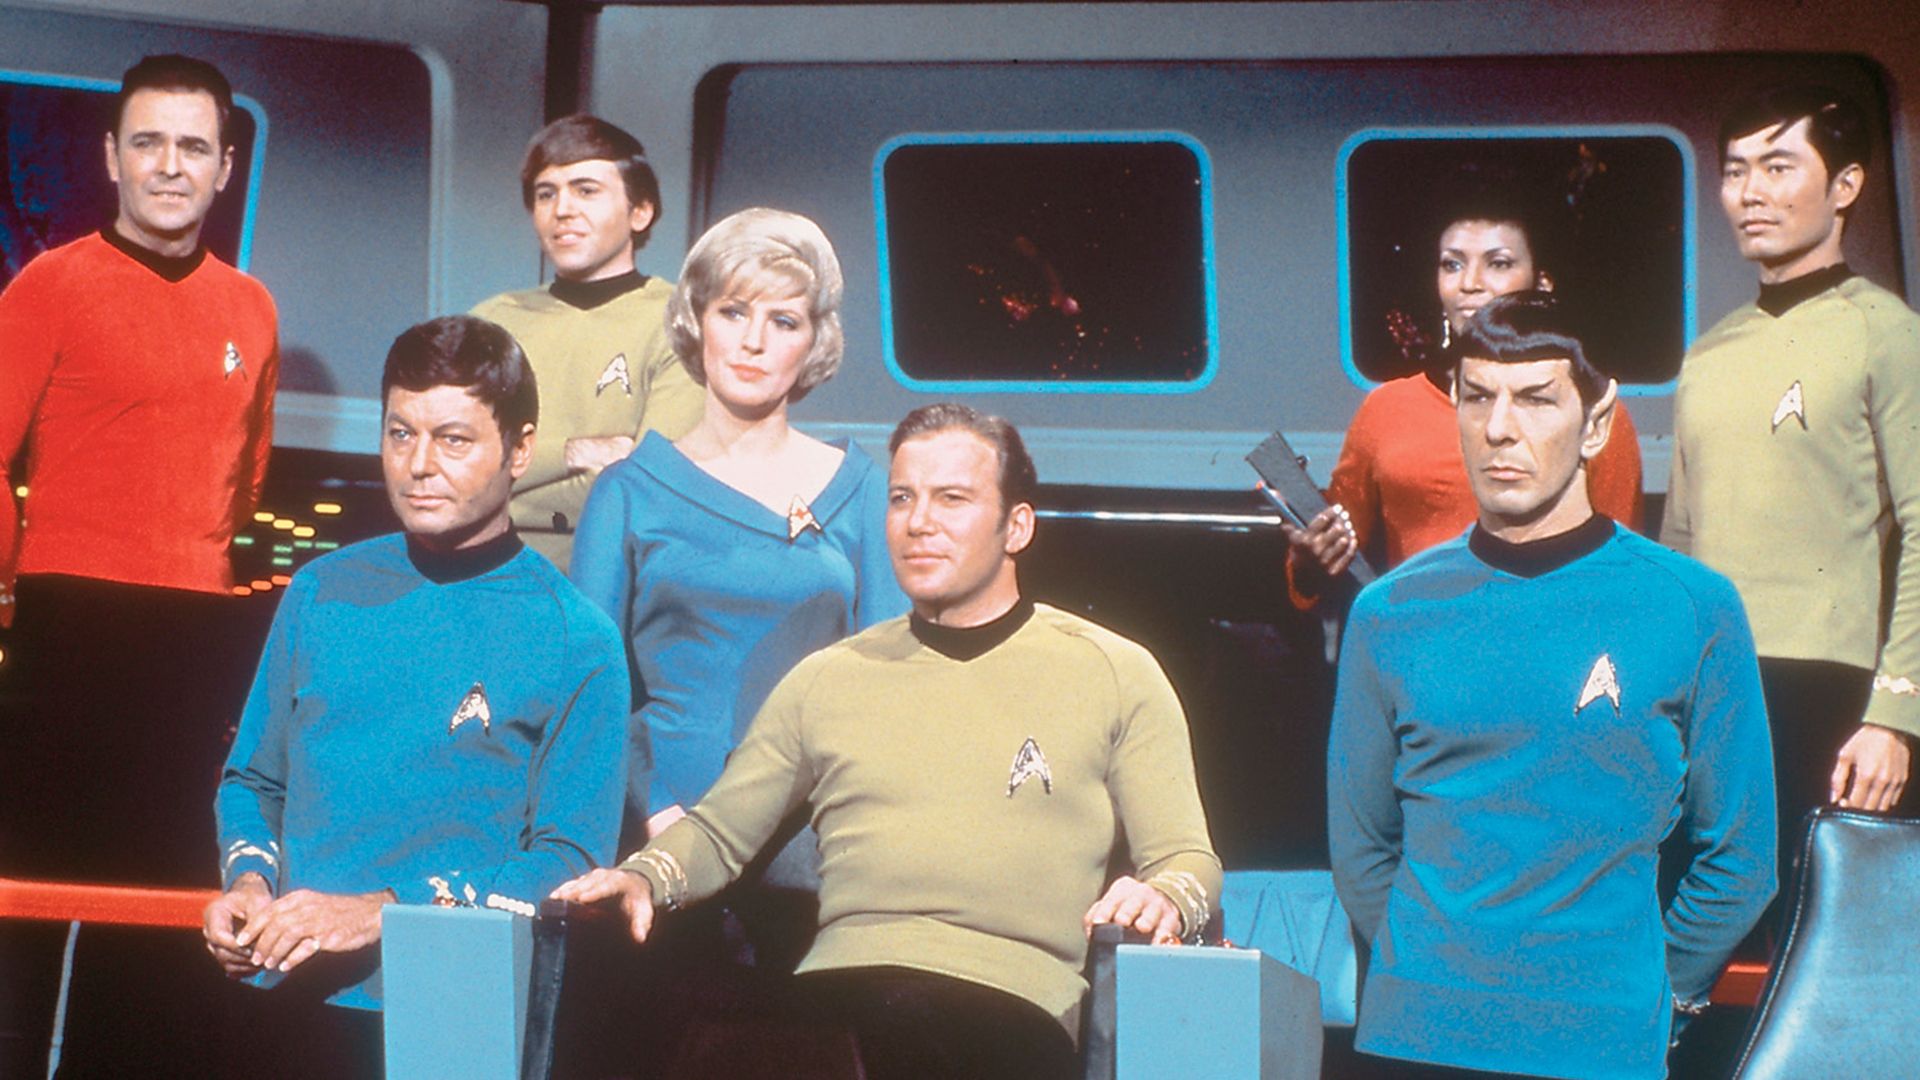 Star Trek' Fans Can Thank These Women For Keeping The Show's